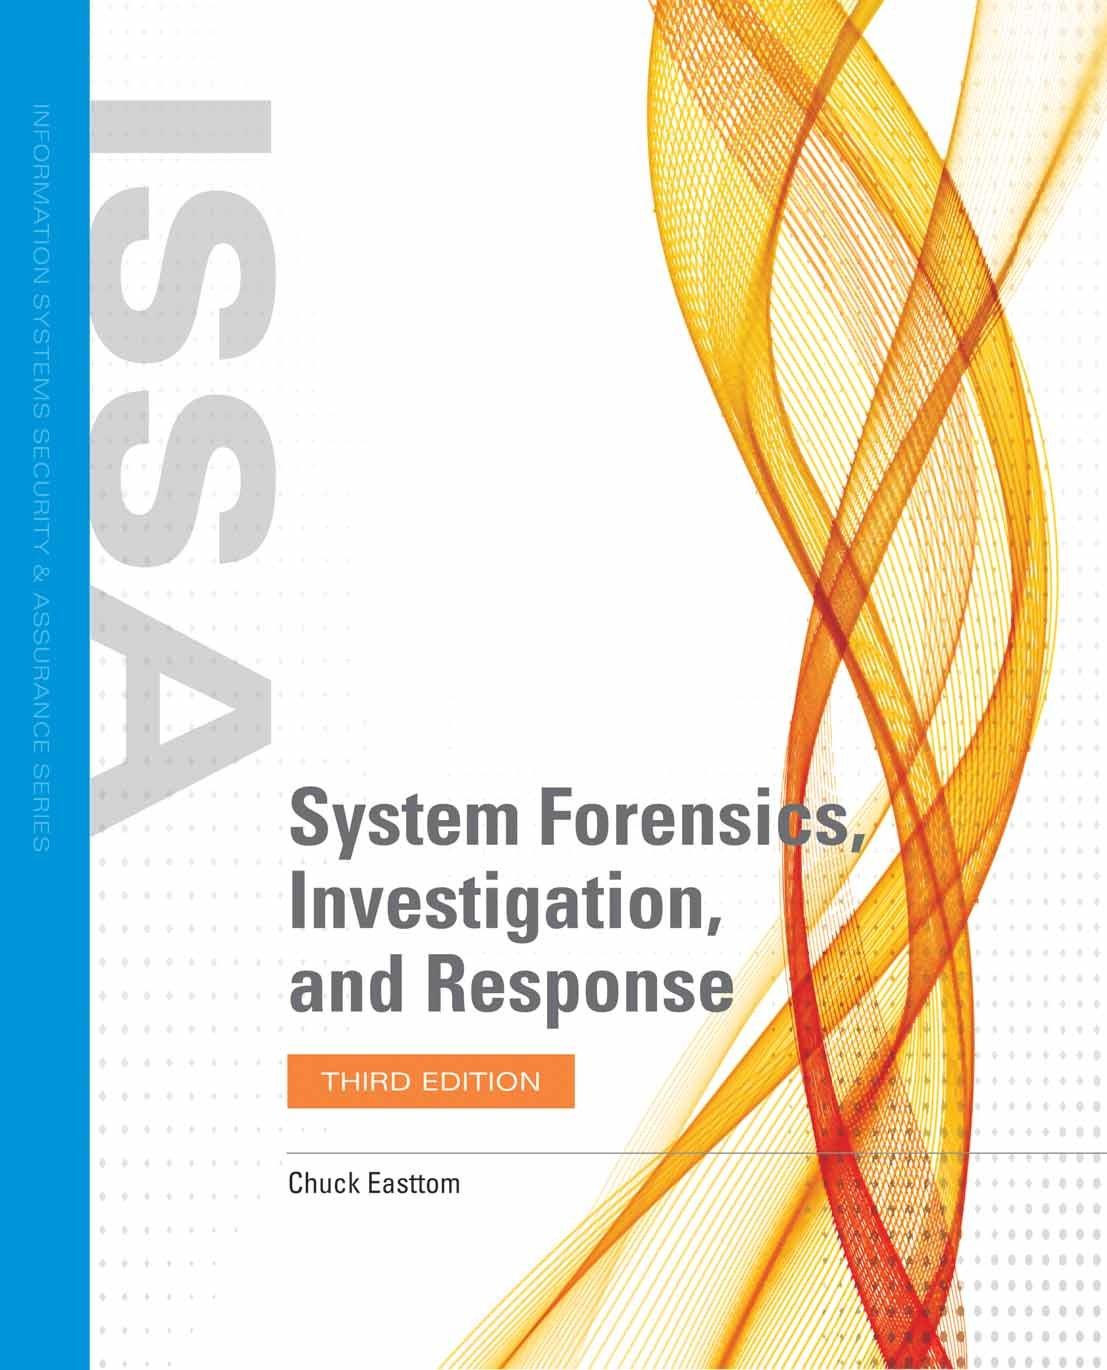 system forensics investigation and response 3rd edition chuck easttom 1284121844, 978-1284121841